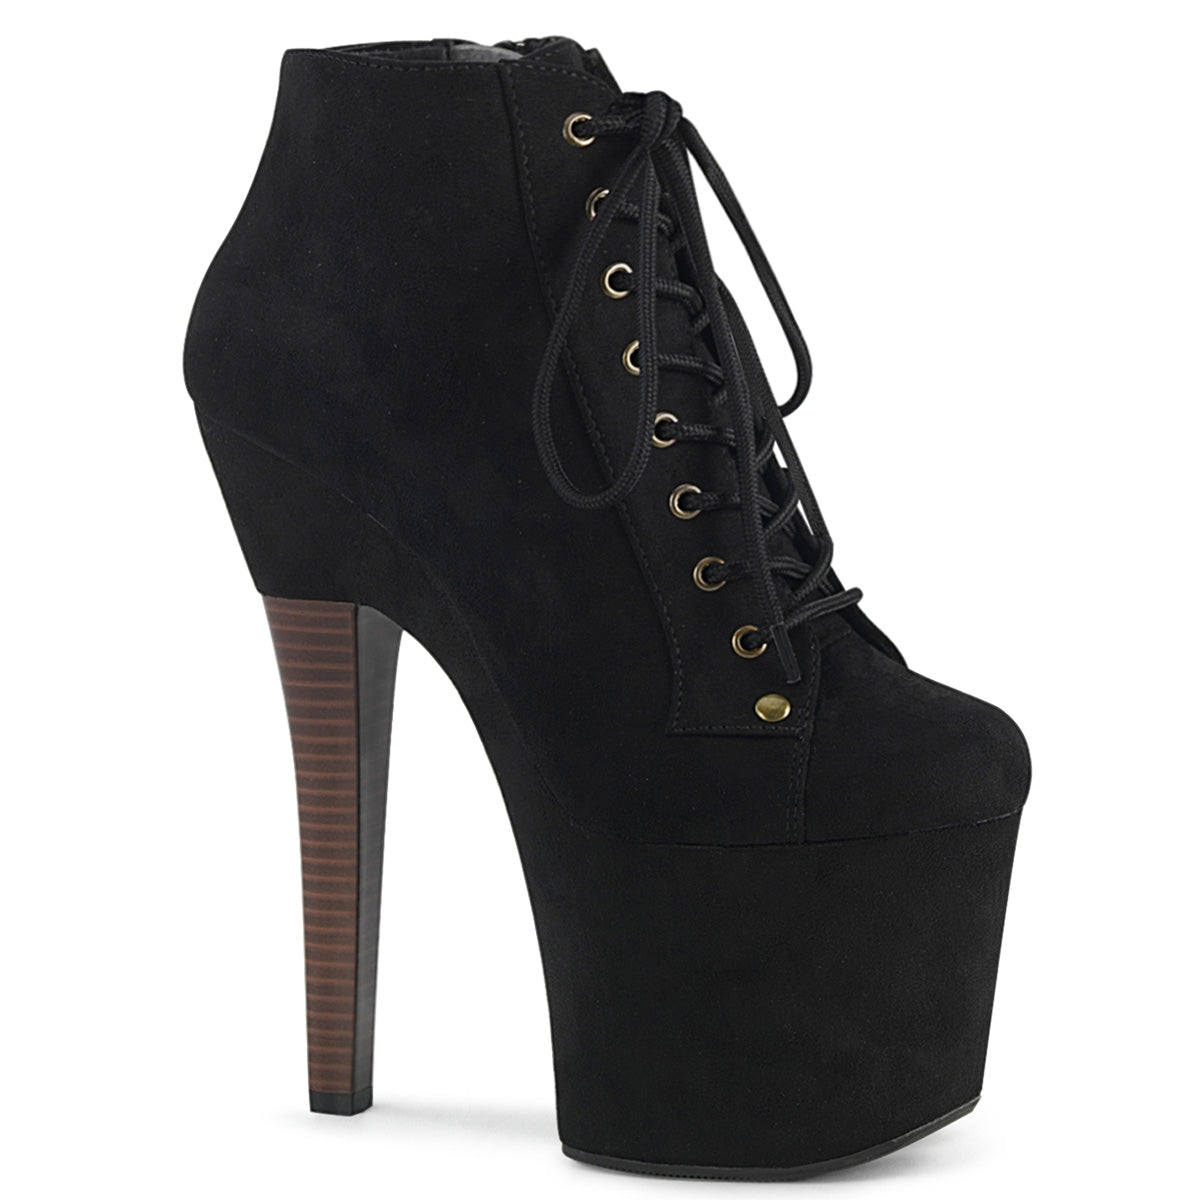 RADIANT-1005 Ankle Boots